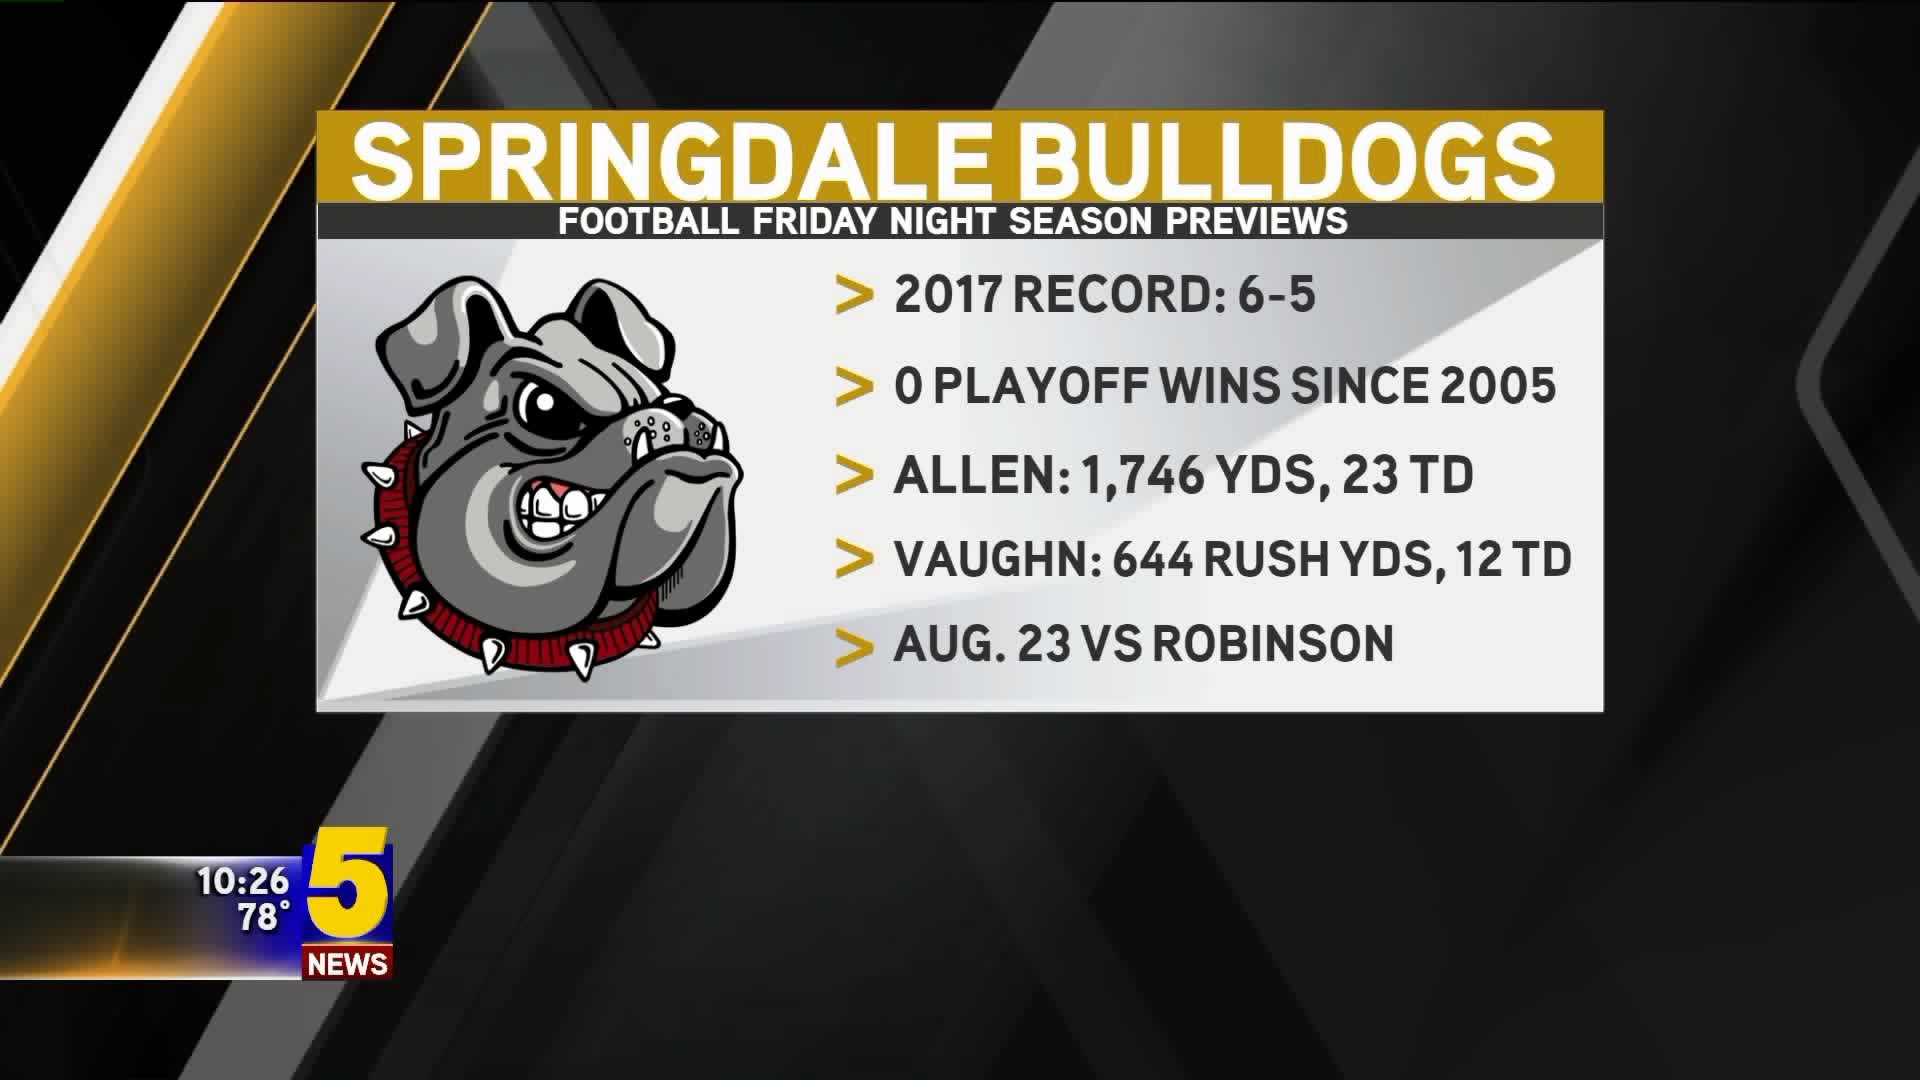 New faces look to lift Springdale